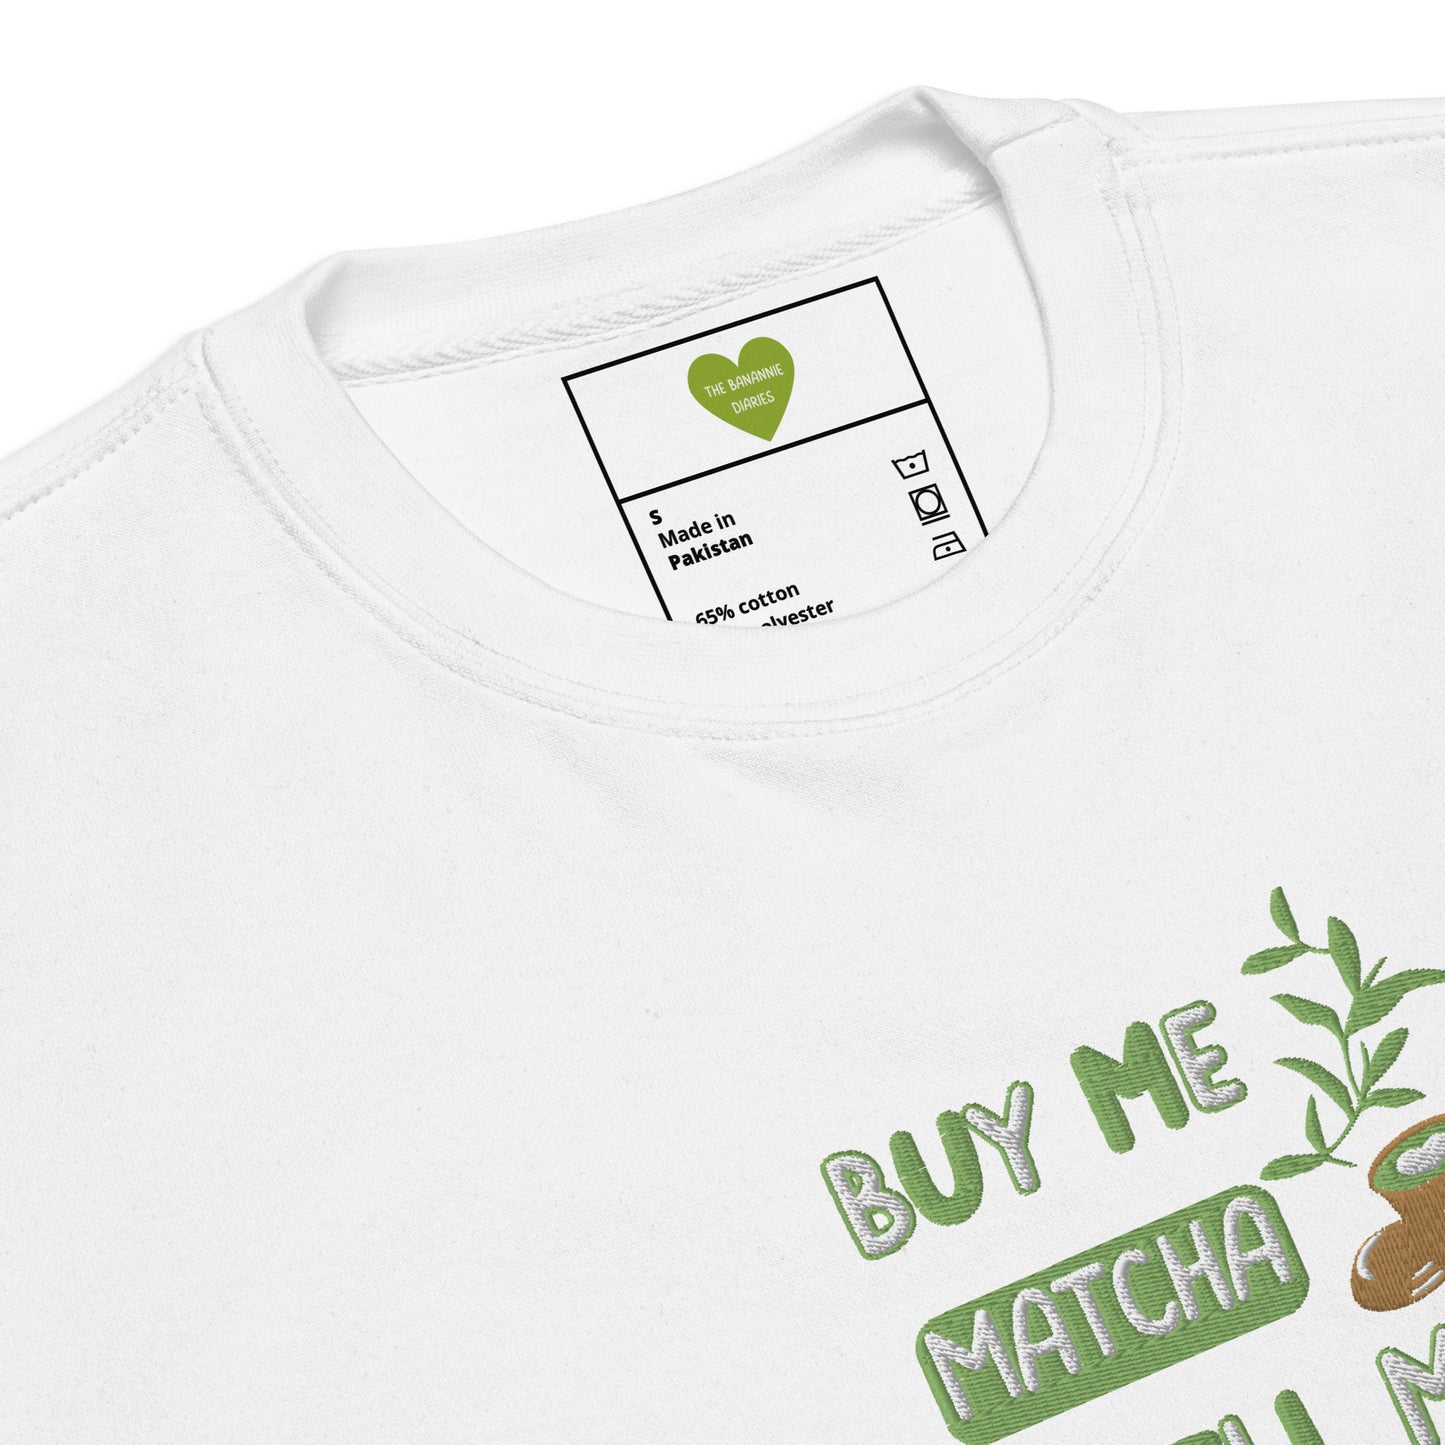 Buy Me Matcha and Tell Me I'm Pretty - Embroidered Crewneck Sweatshirt by The Banannie Diaries